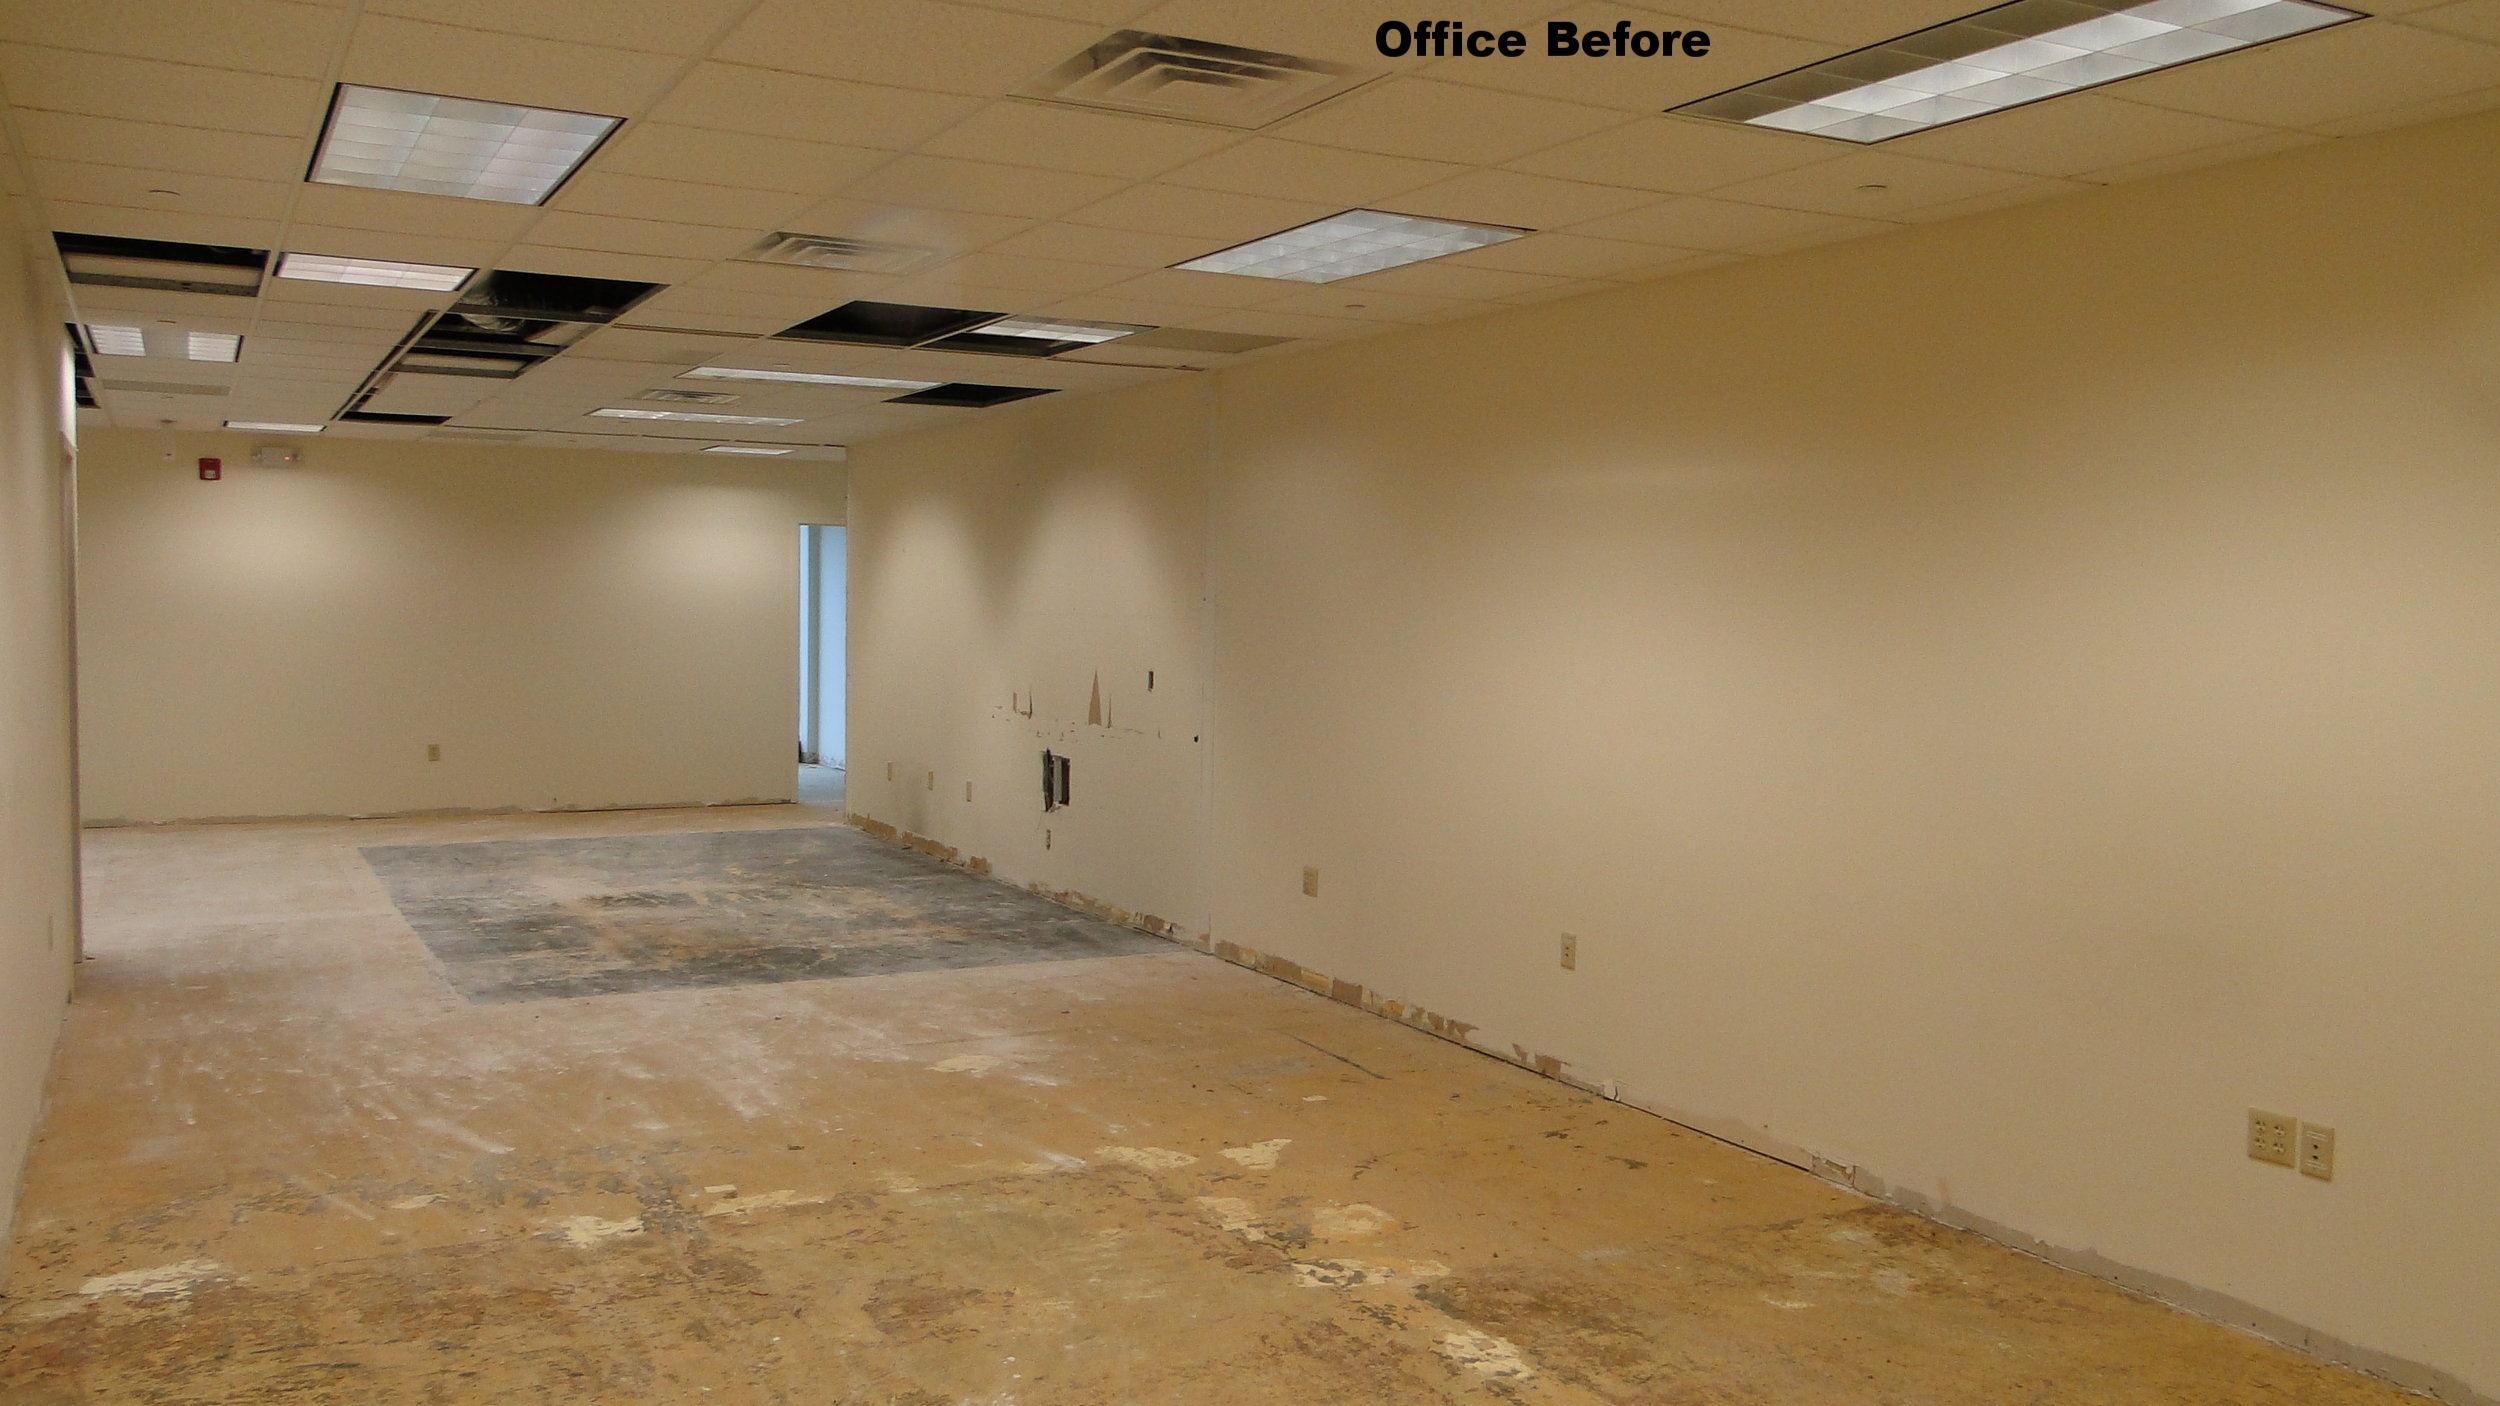 OFFICE SPACE BEFORE 